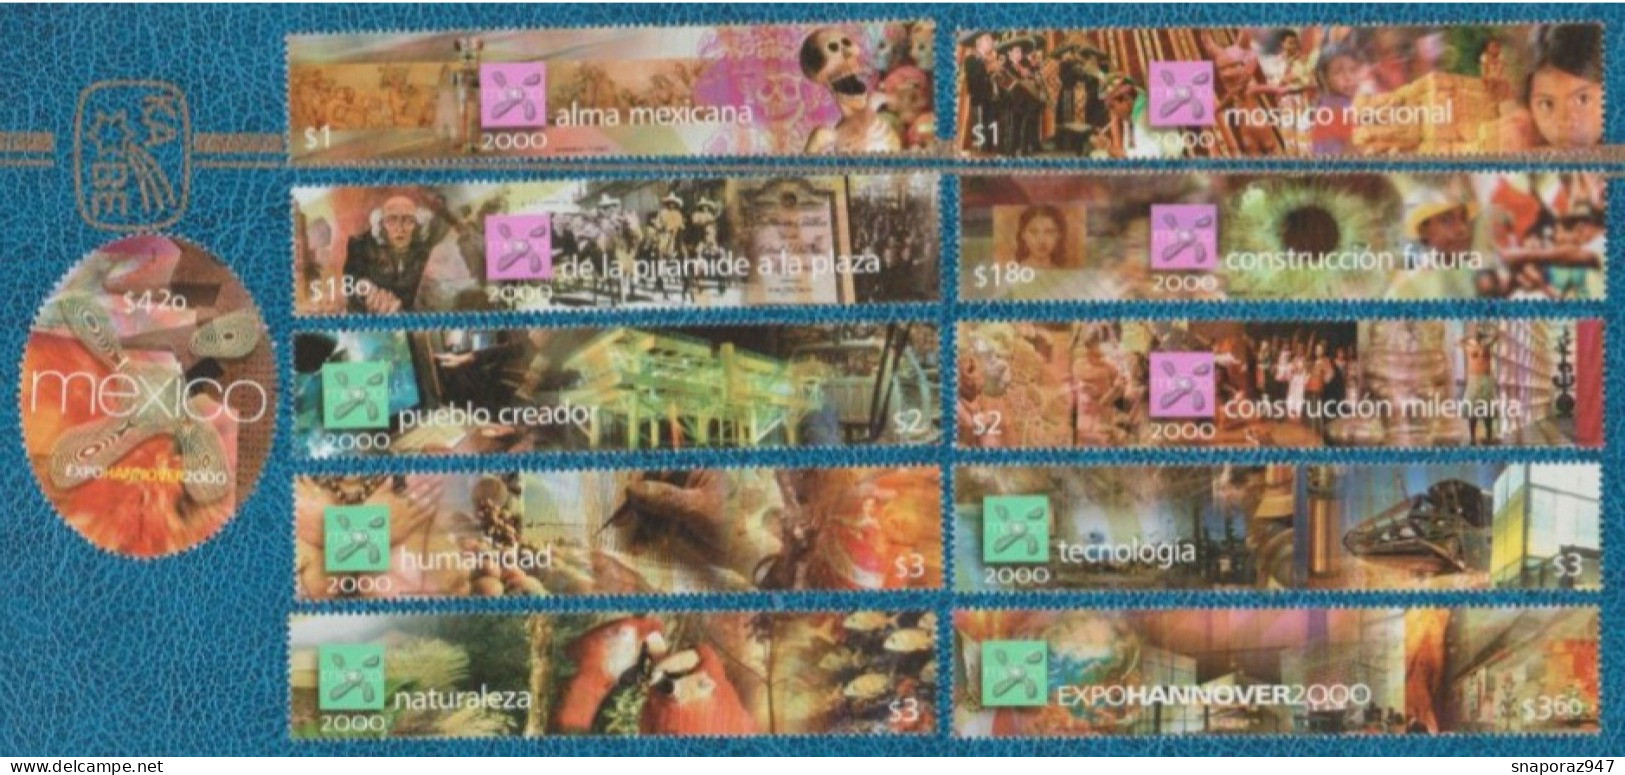 2000 Messico "Expo 2000" Universal Exhibition In Hanover (Block Printed) Set MNH** RX77 - 2000 – Hannover (Deutschland)